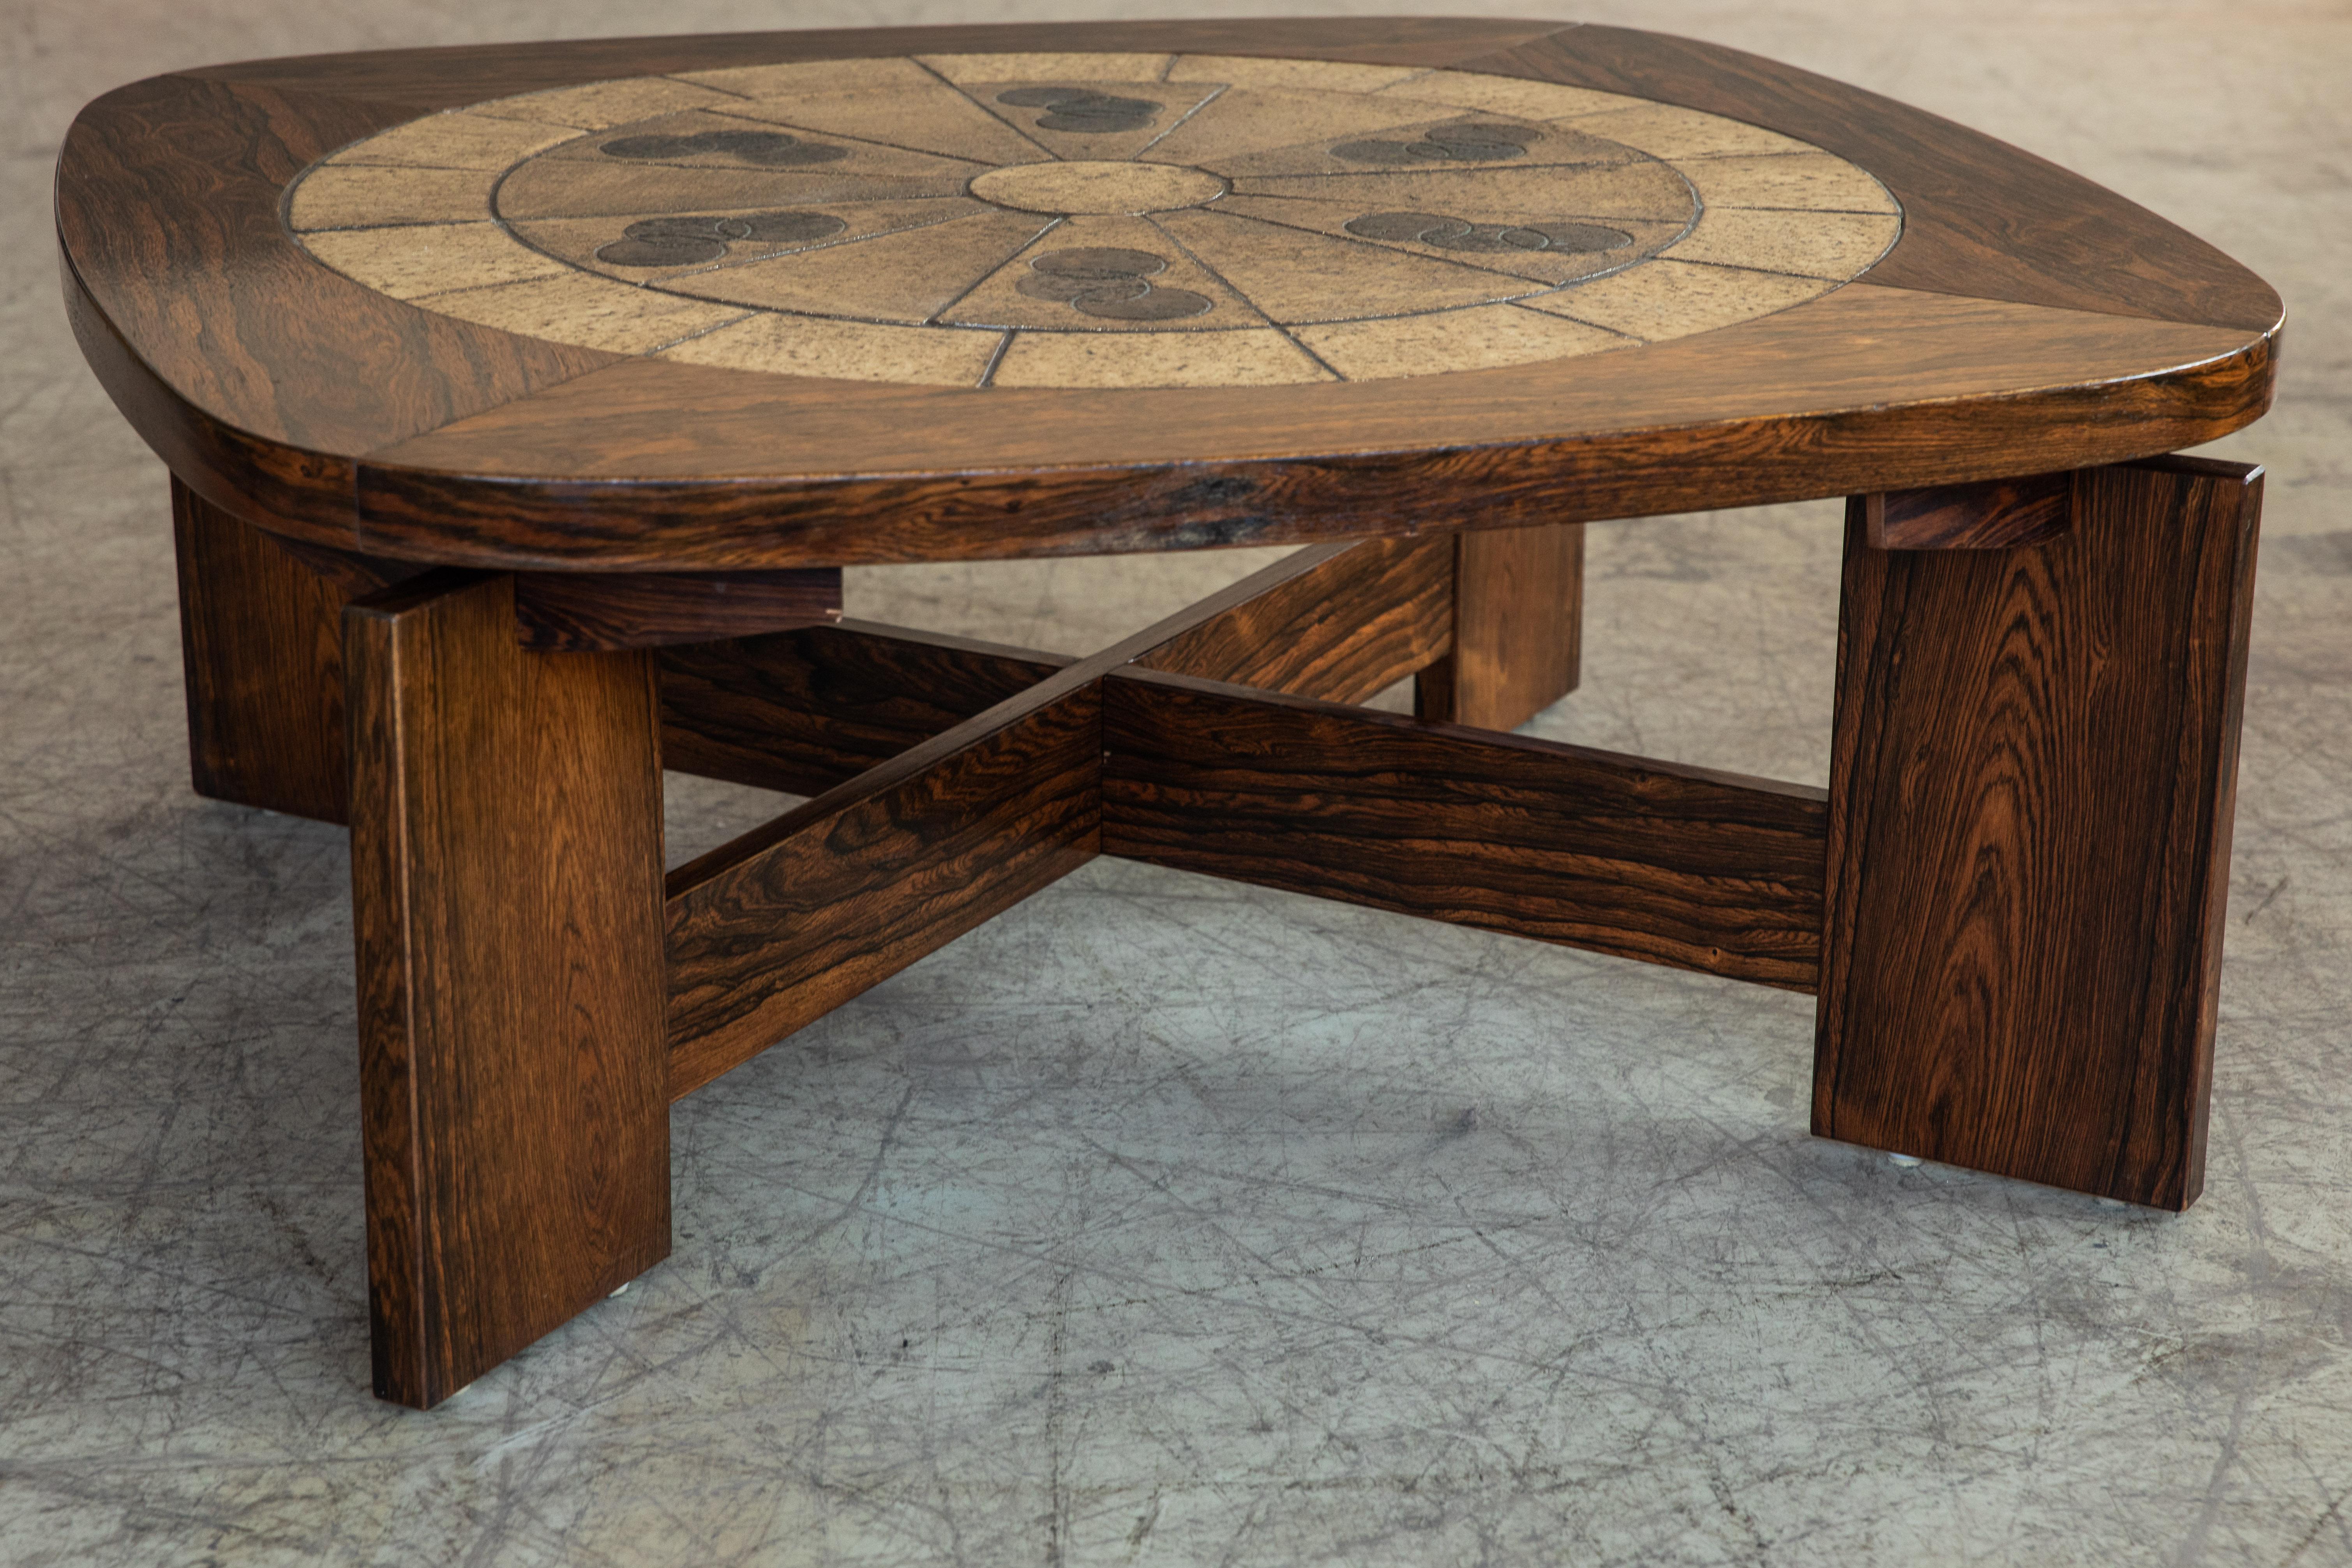 Large Danish Mid-Century Round Coffee Table in Rosewood and Ceramic Tiles  1960's at 1stDibs